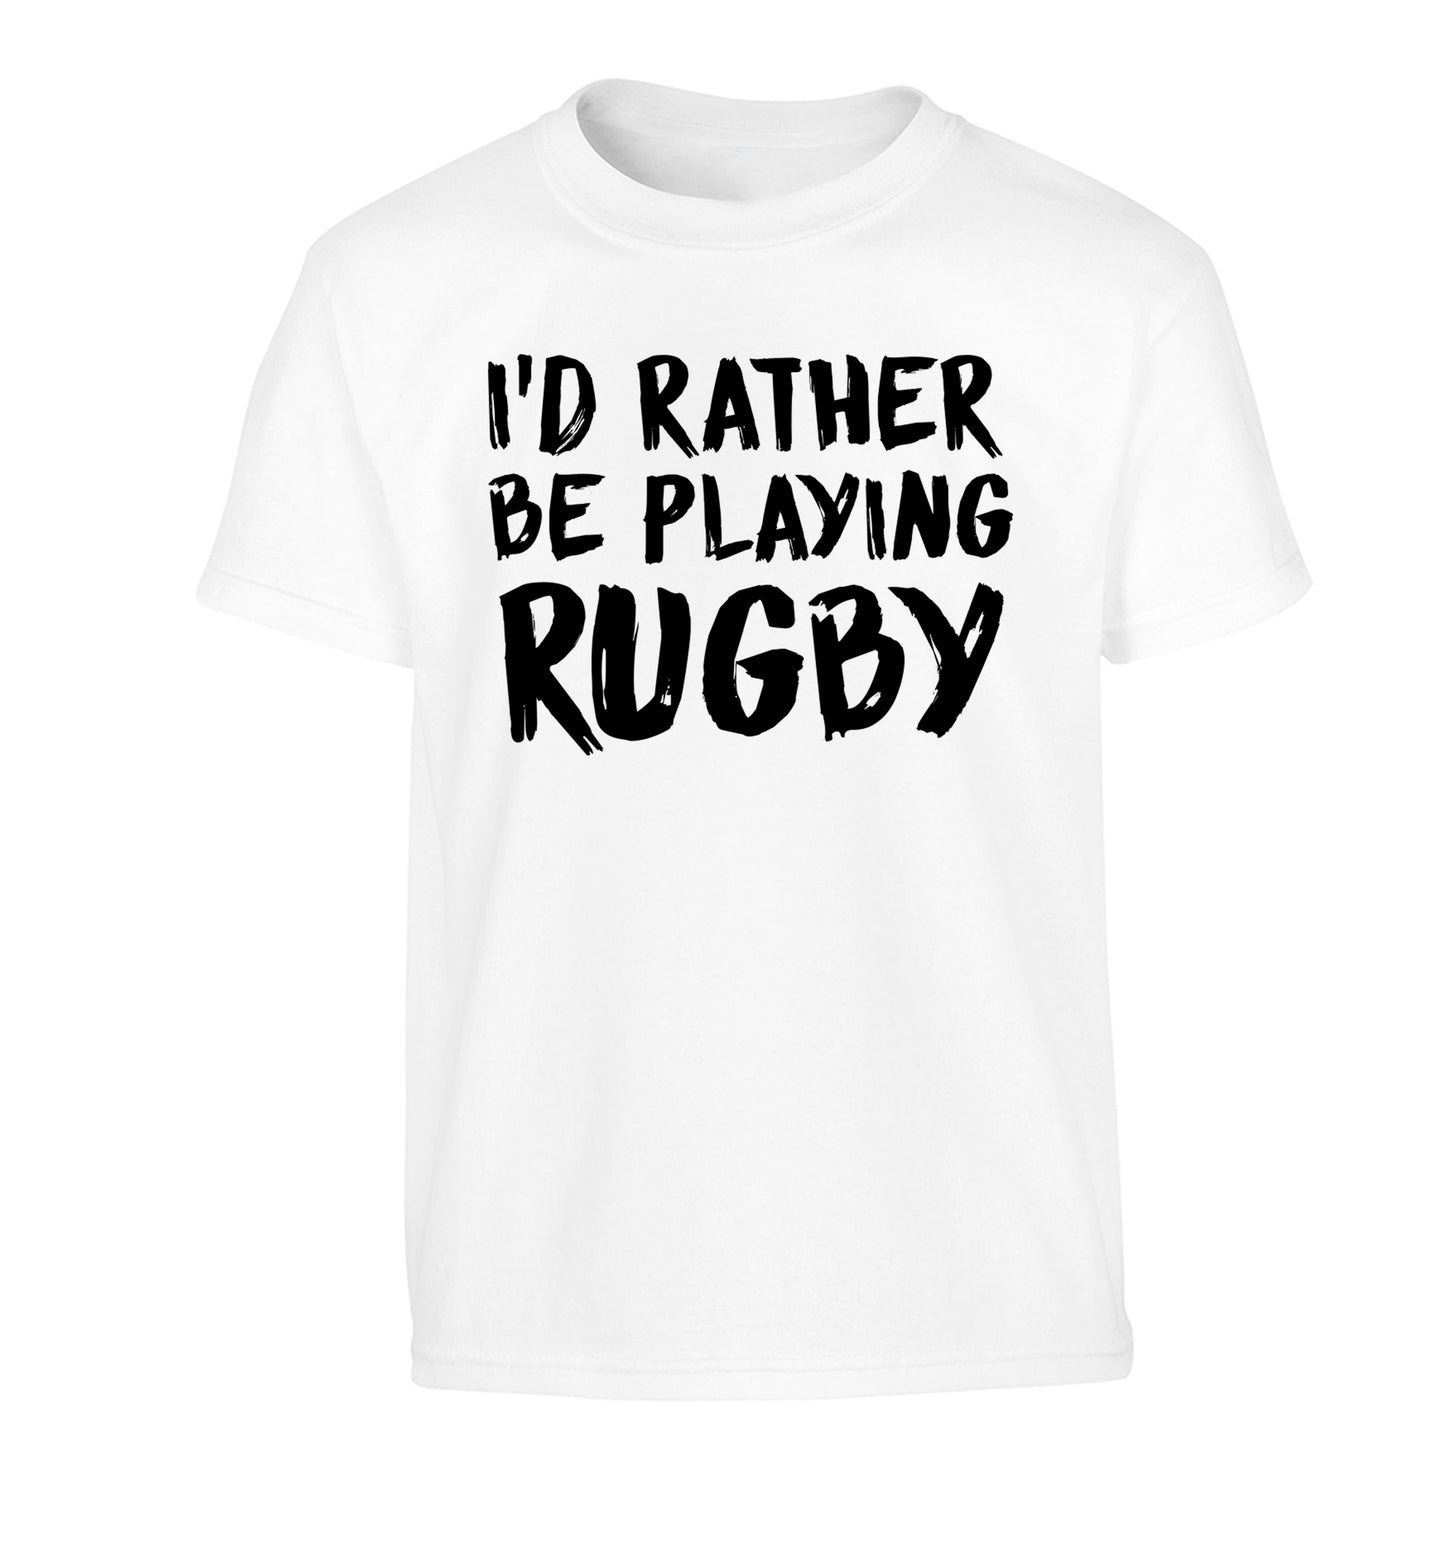 I'd rather be playing rugby Children's white Tshirt 12-13 Years